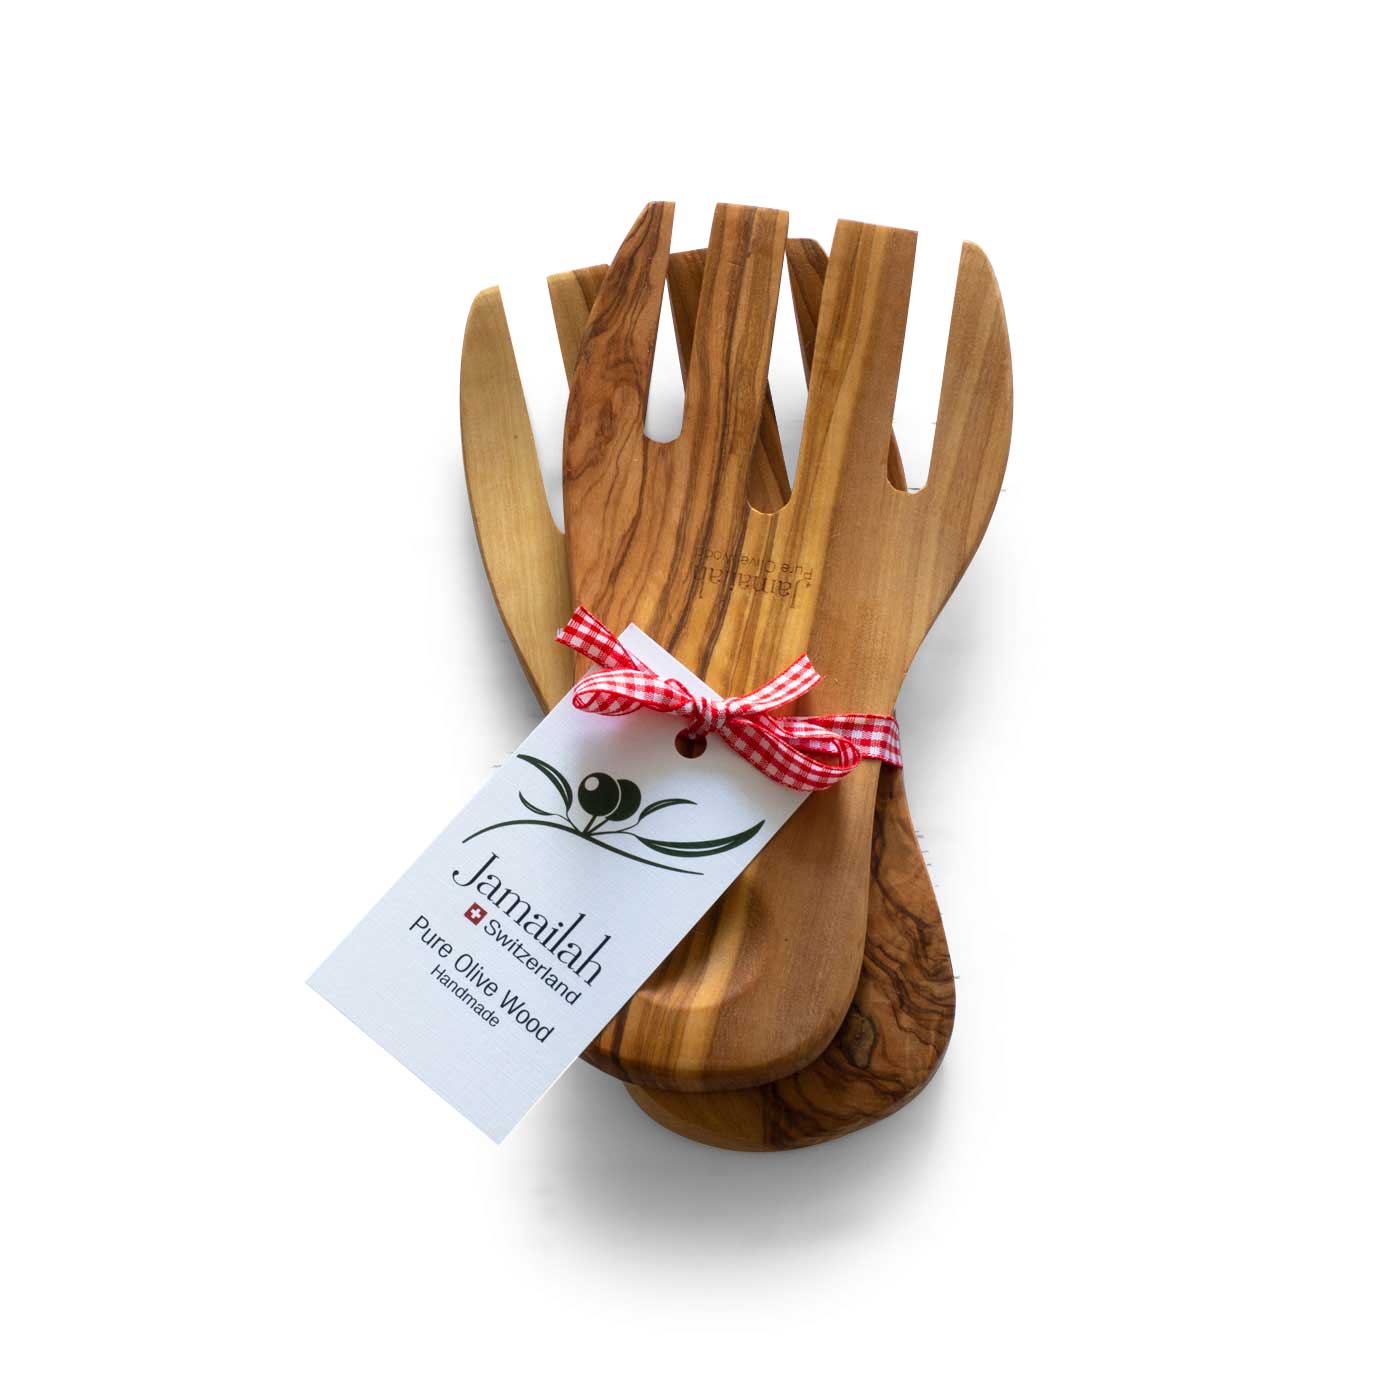 salad forks handcrafted from olive wood